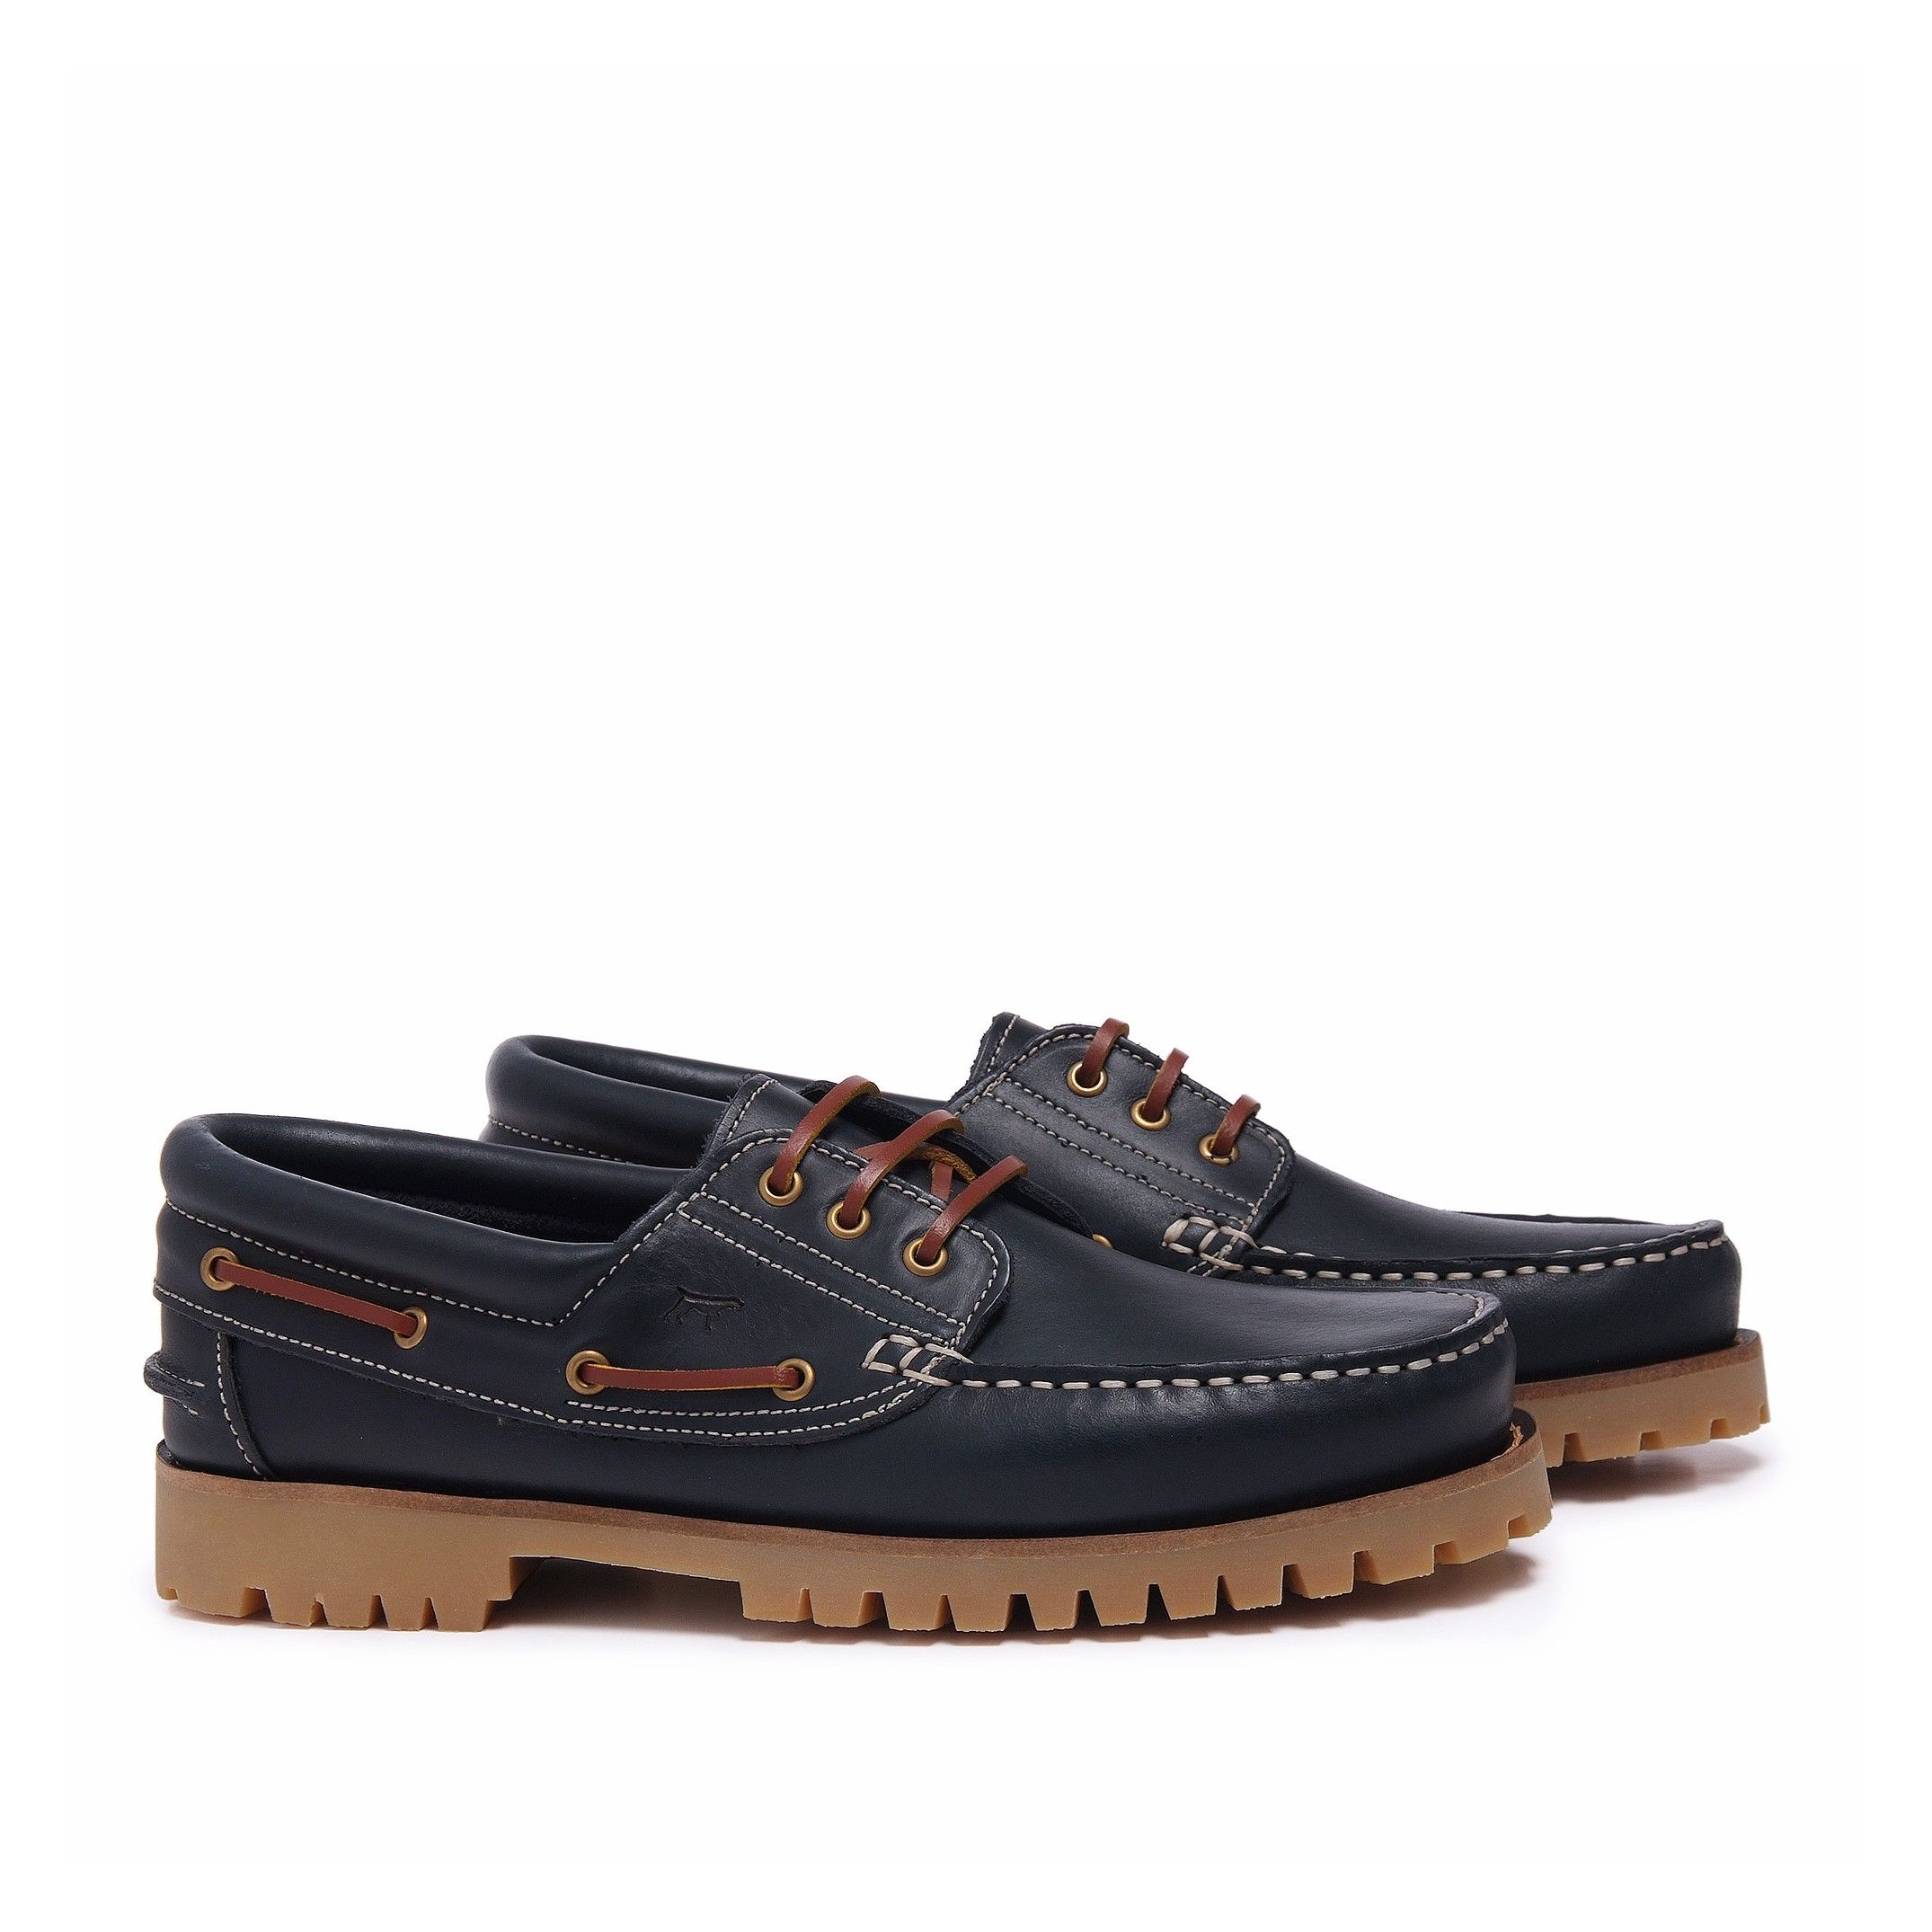 Classic model of Castellanisimos. It is made with high quality materials and perfect manufacturing. Leather boat shoes with laces closure for men. Comfortable and feets correctly. From 40 to 45 size. Upper is made of nappa leather. Inner is made of leather. Rubber sole. Spanish product. Brown and navy blue color. Free shipping and return